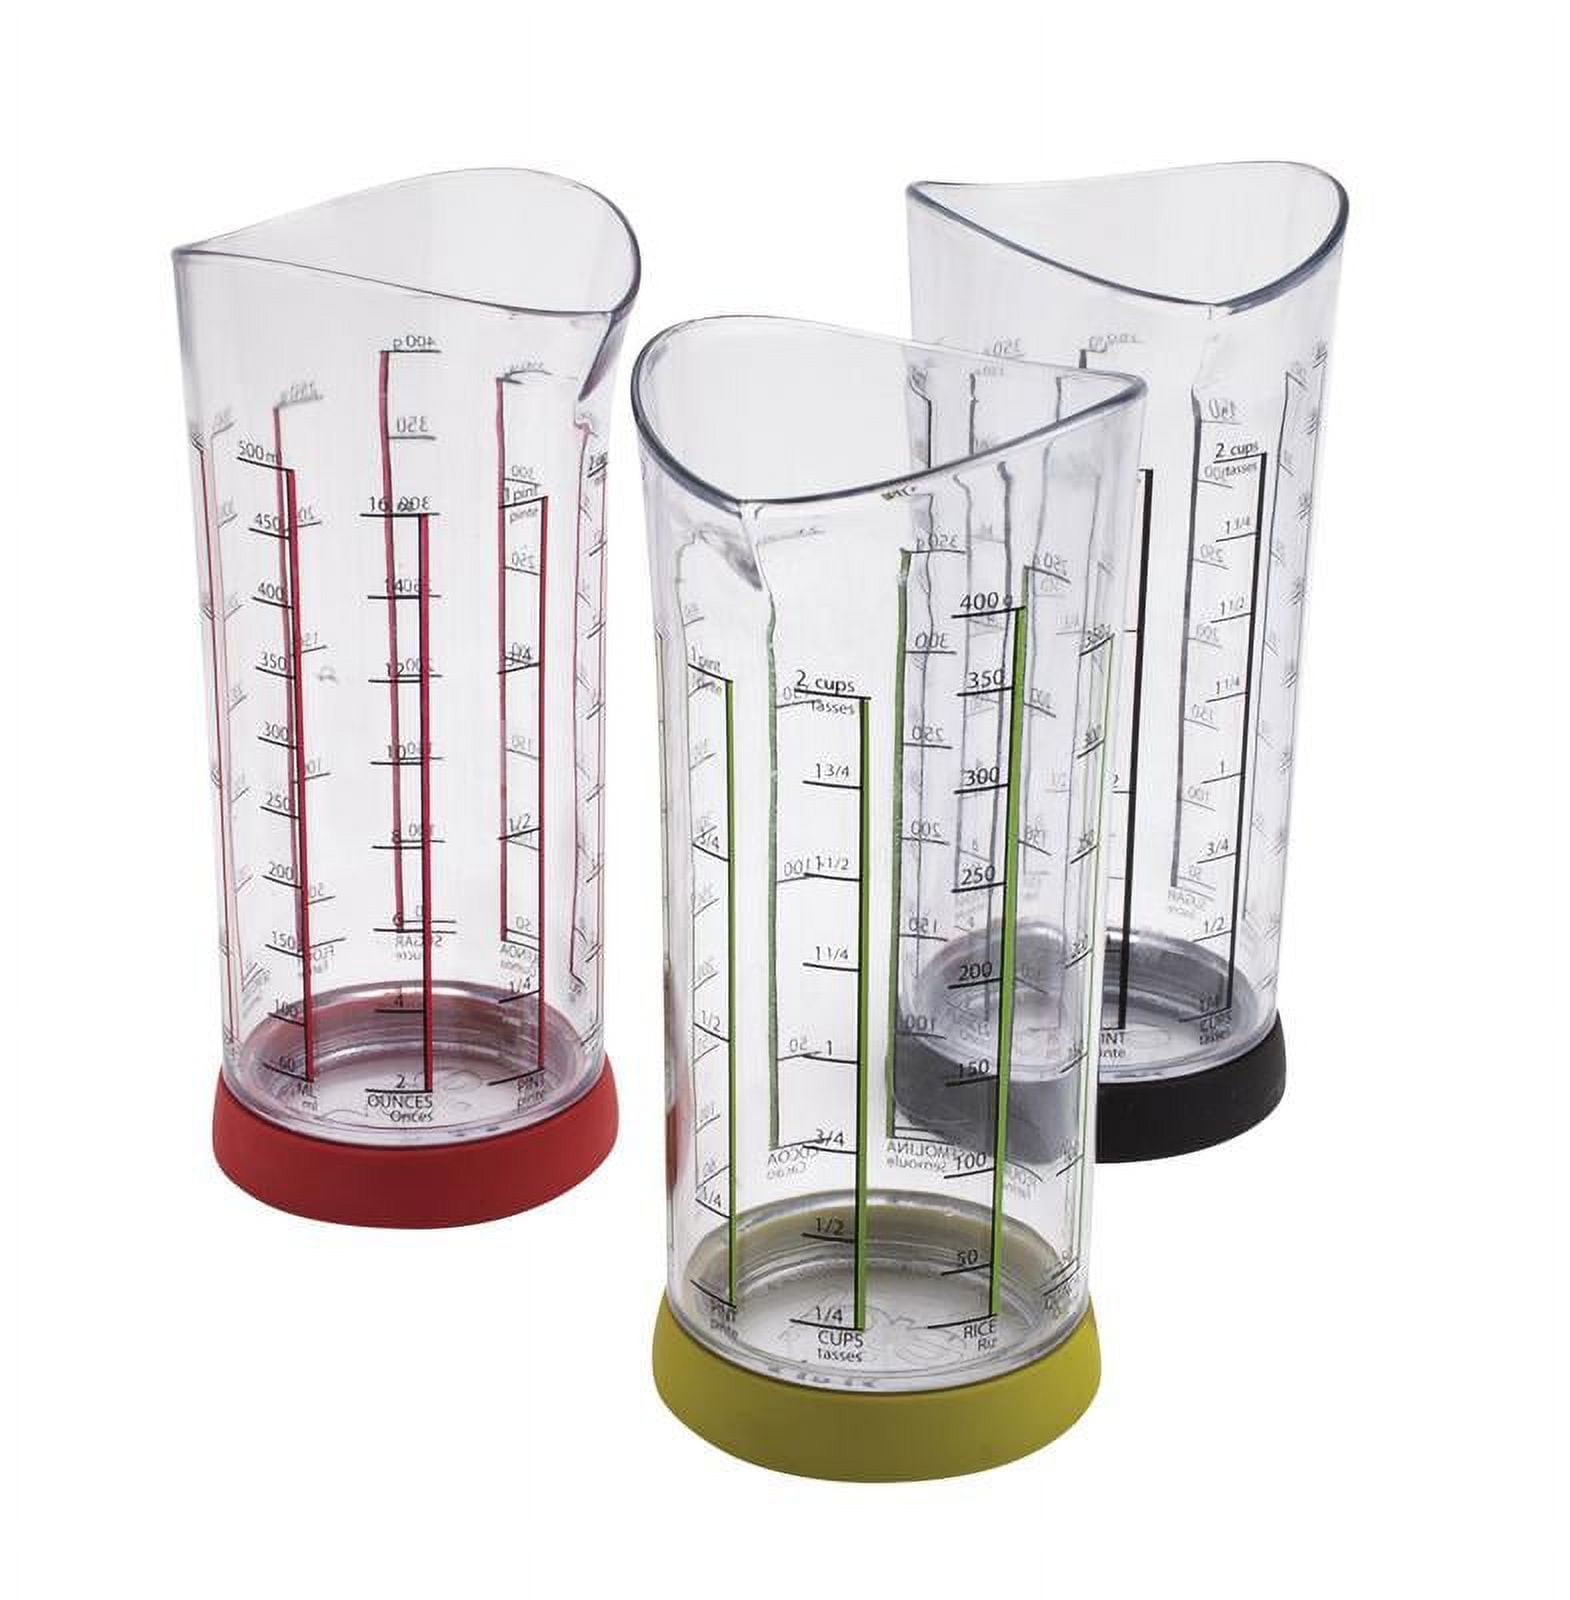 Shoppers Are 'Thrilled' with These Measuring Cups